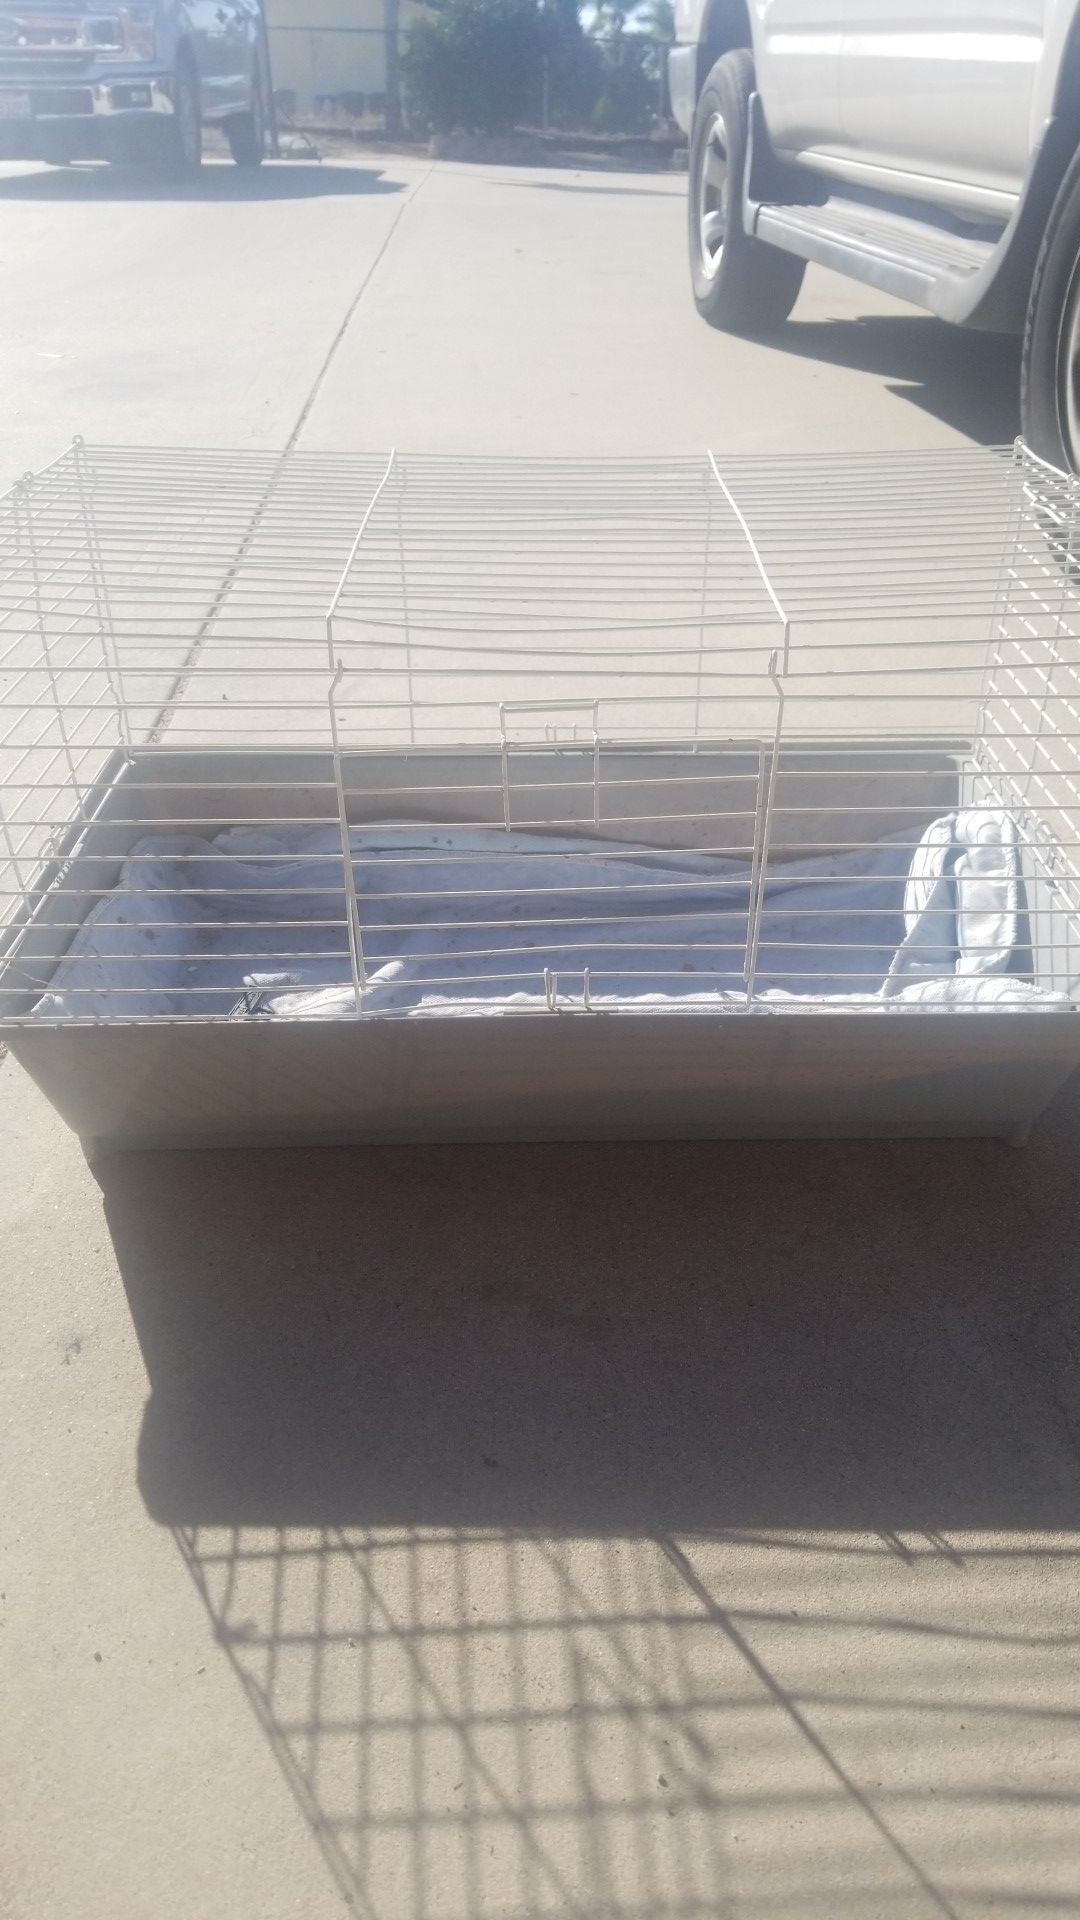 Misc free items ..Guinea pig /rabbit cage cleaning out garage need to get rid of it